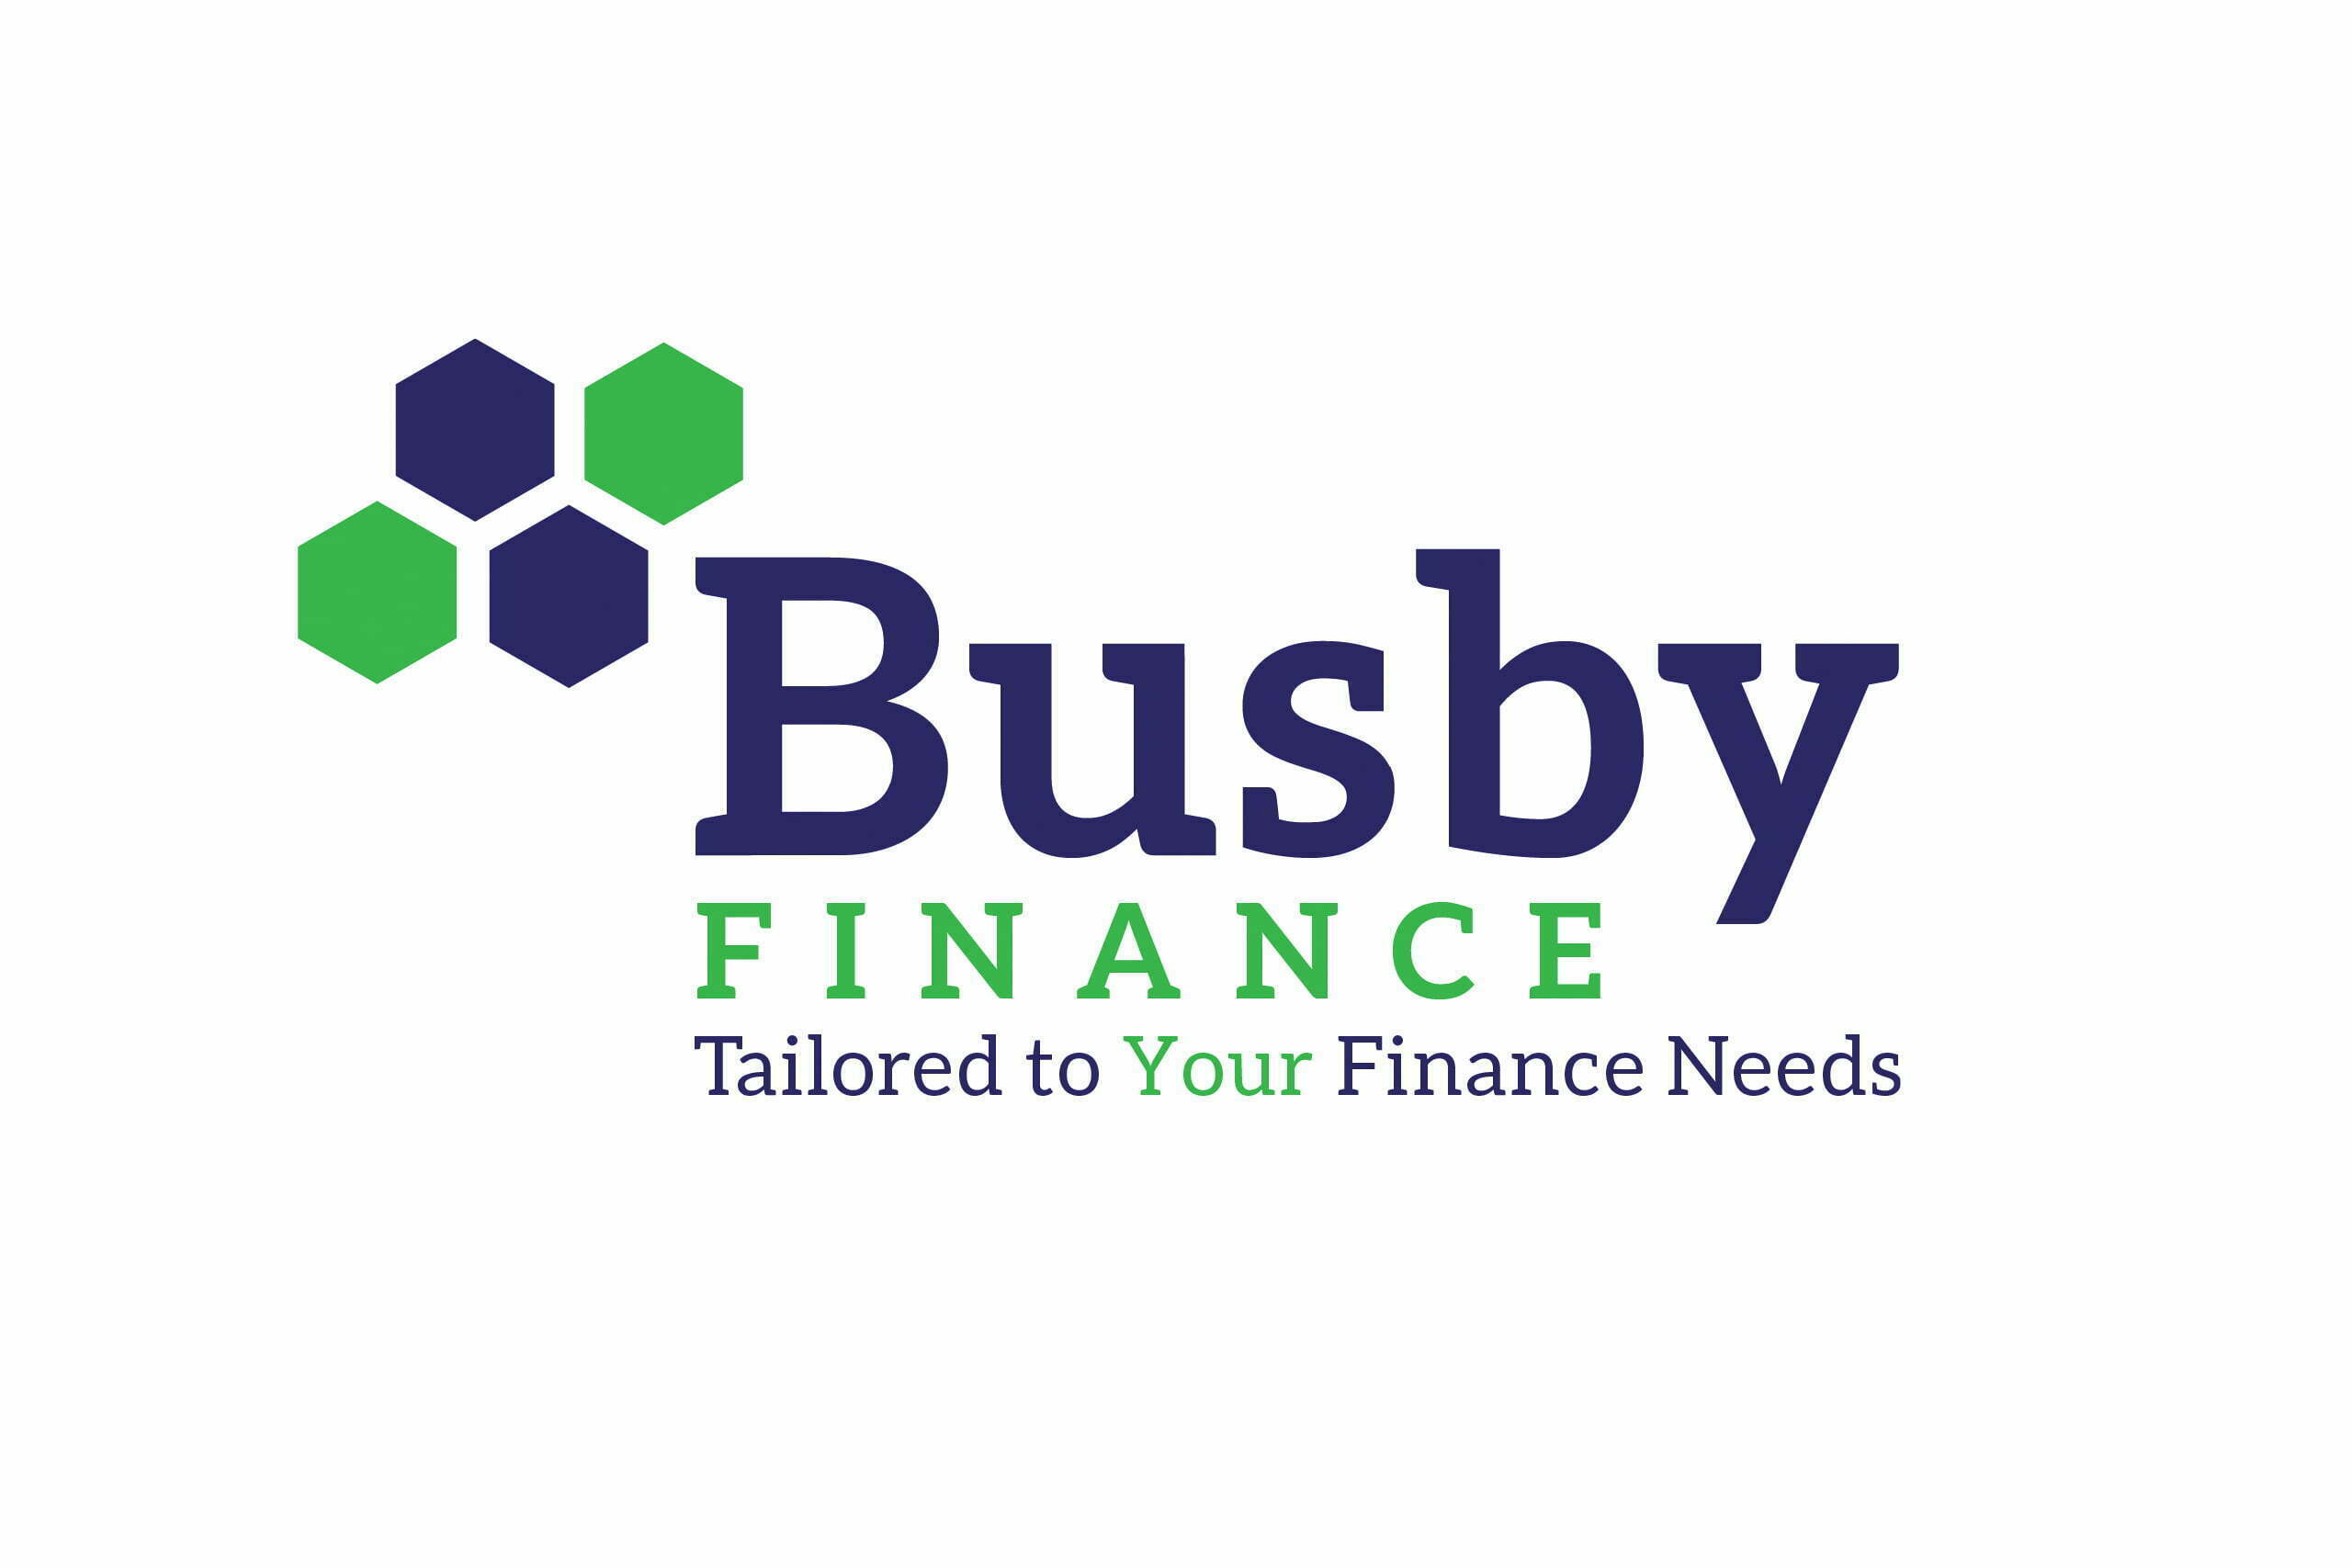 Why choose Busby Finance?